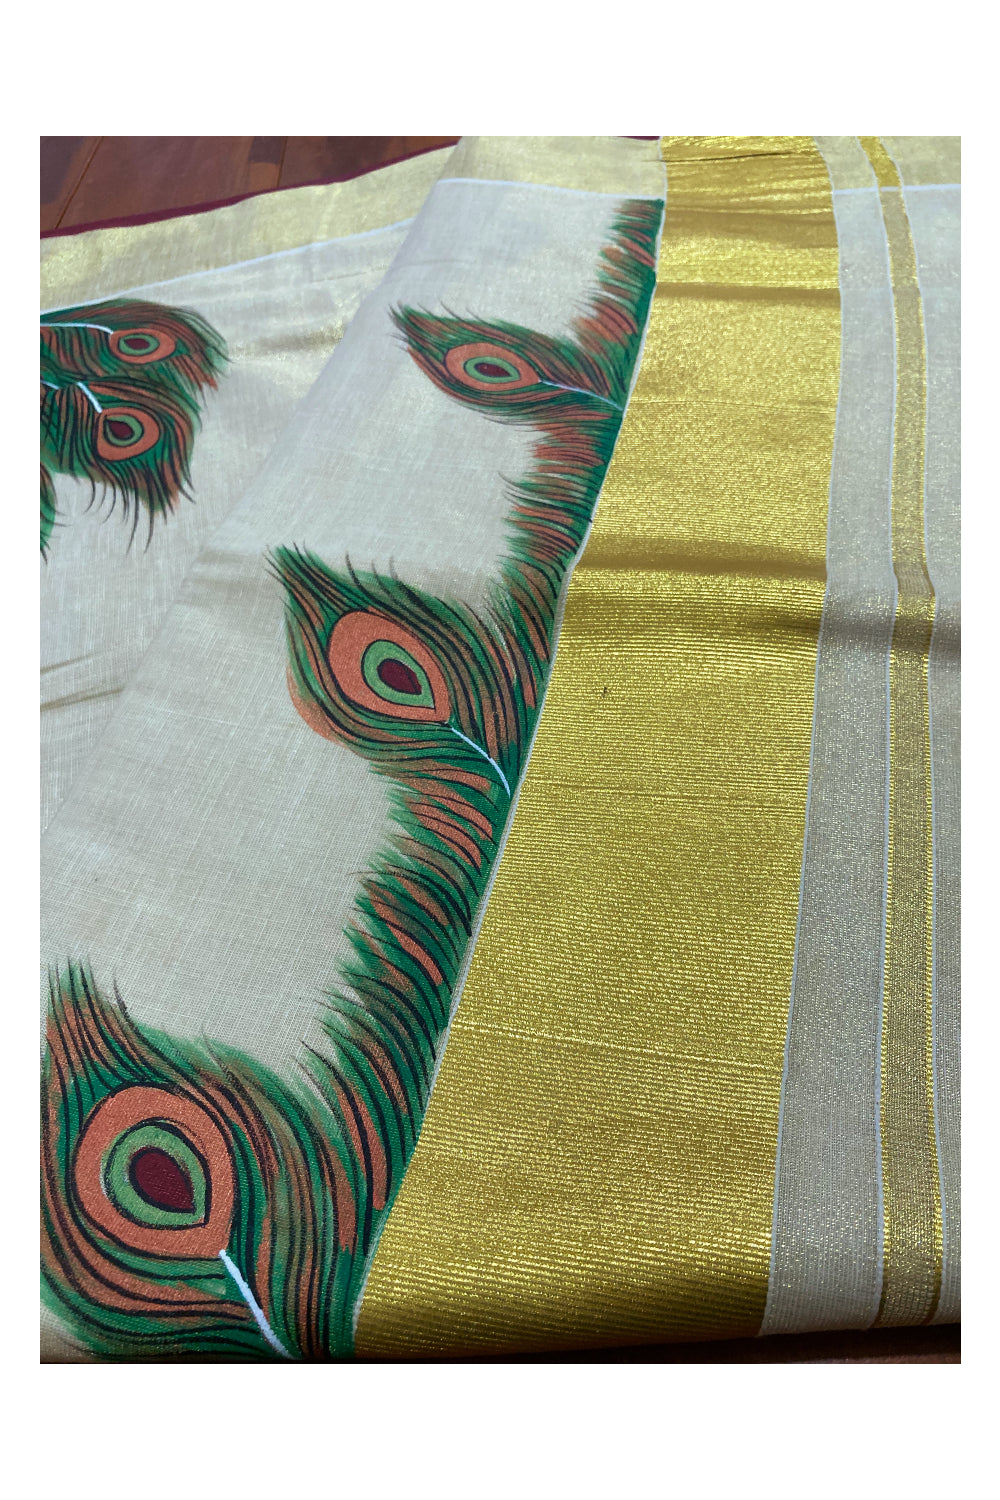 Kerala Tissue Kasavu Saree with Hand Painted Feather Design and Maroon on Border